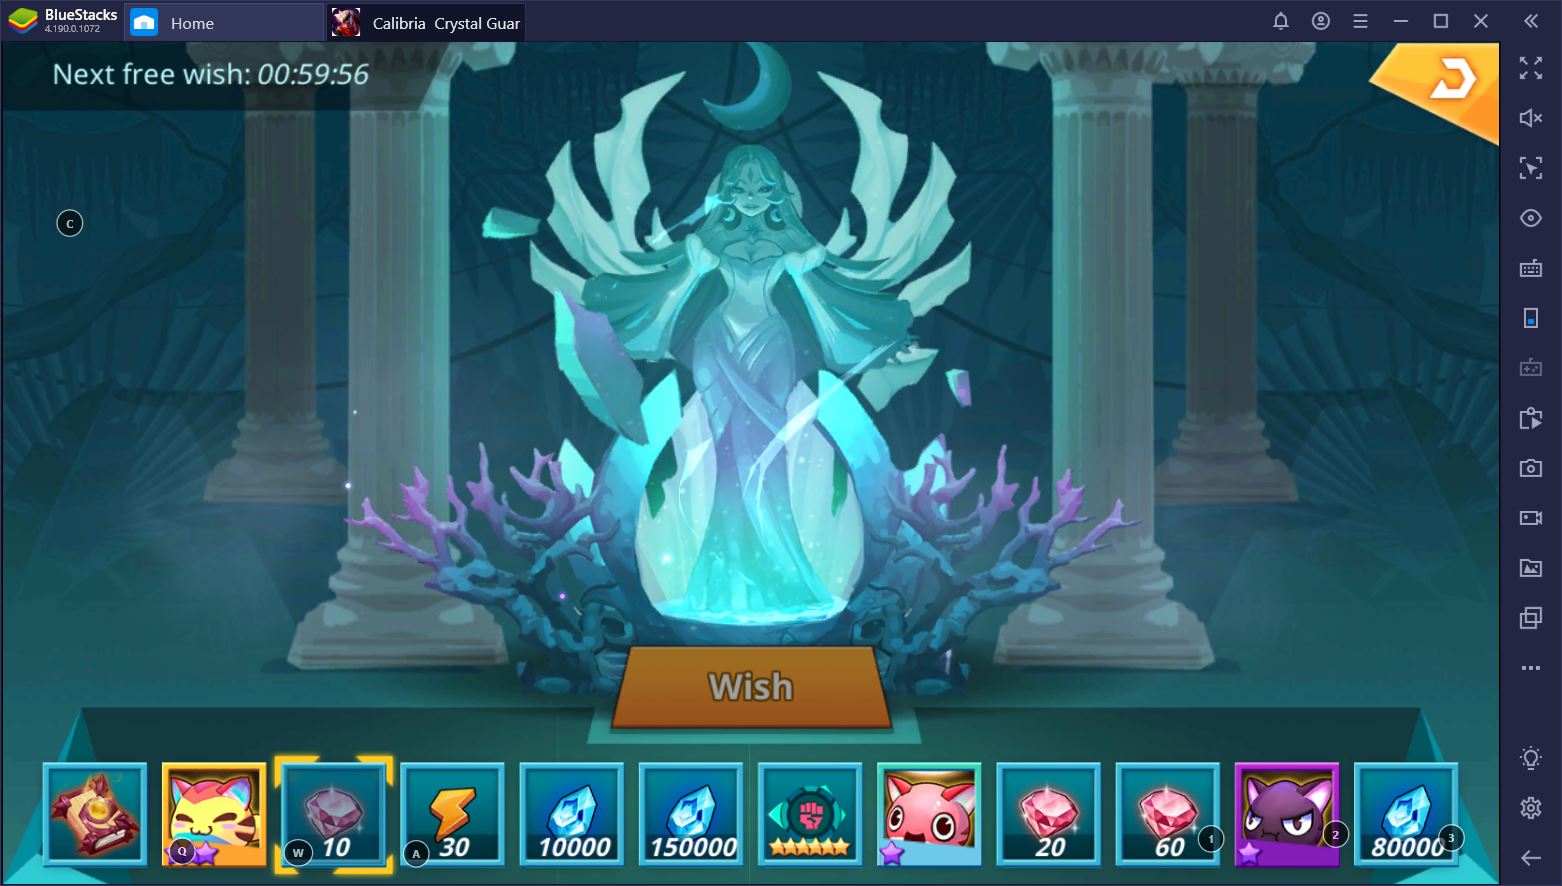 Calibria: Crystal Guardians – Daily To-Do List for Active Players